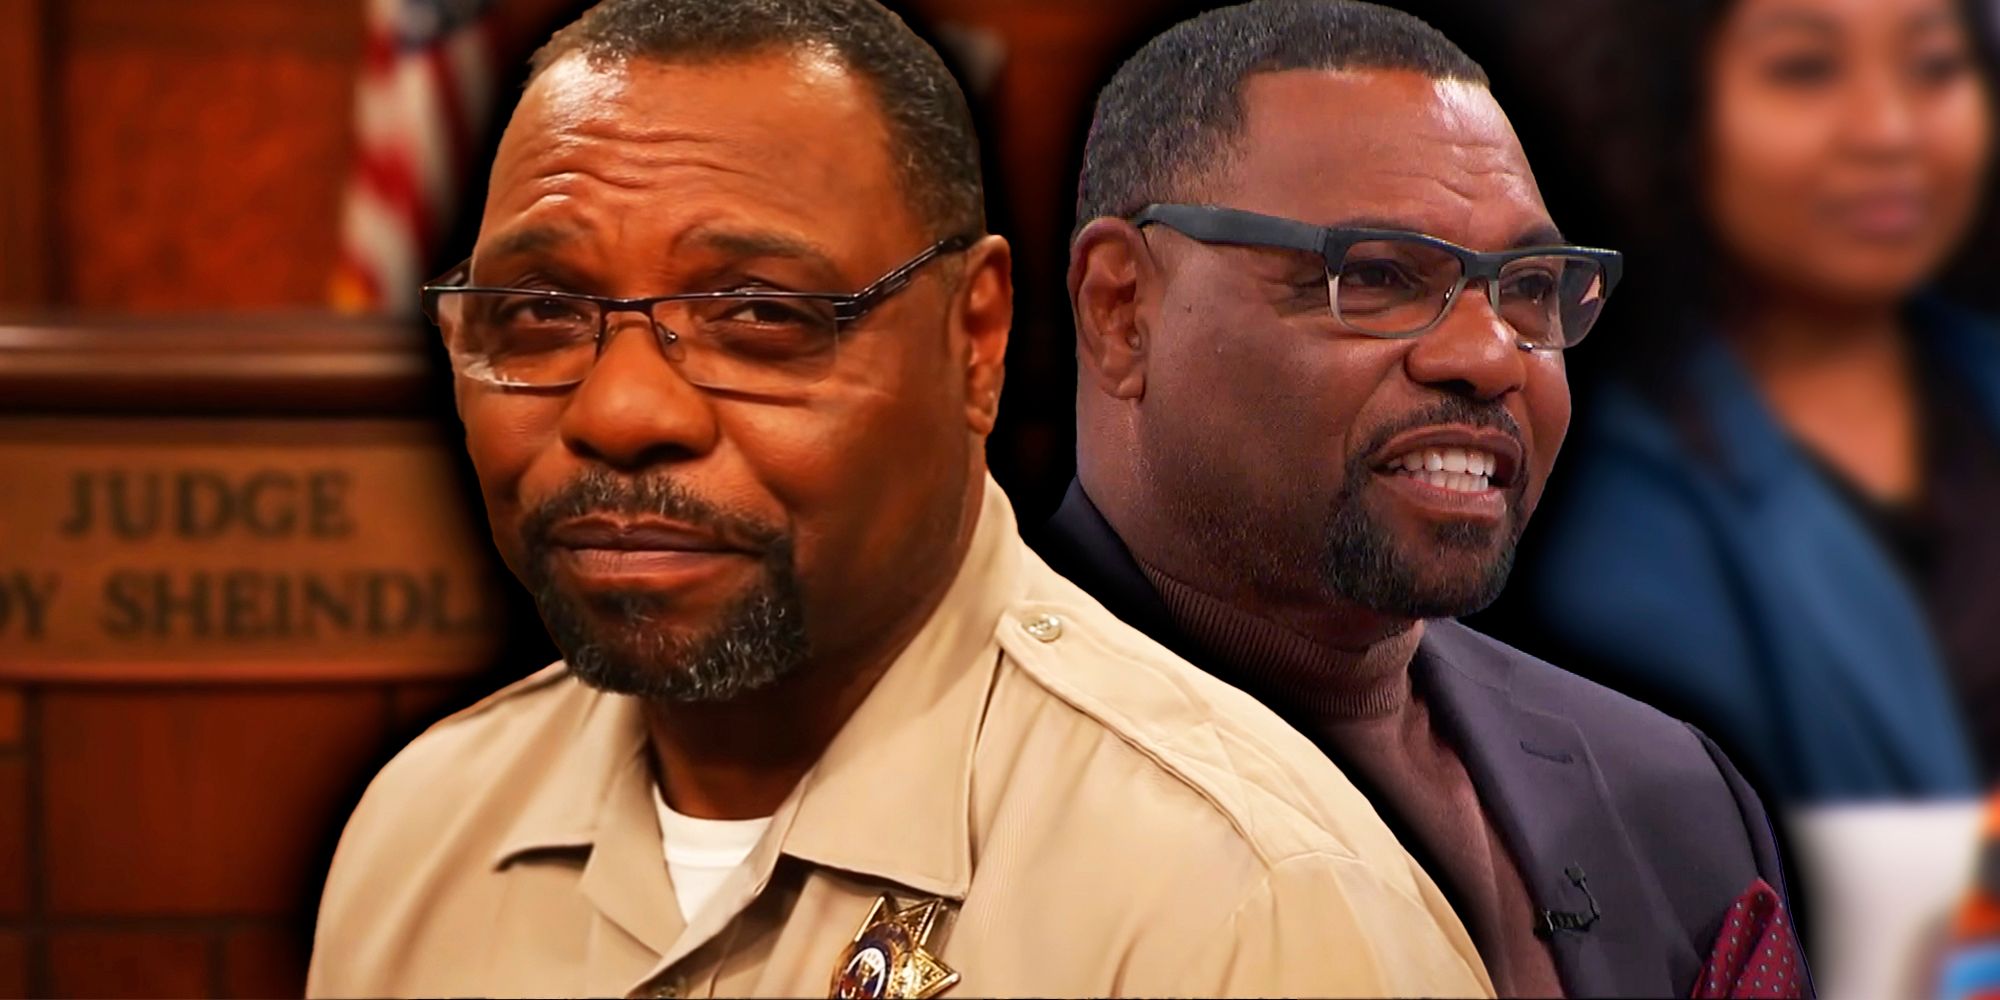  Bailiff Petri Hawkins Byrd from Judge Judy montage in and out of bailiff's uniform